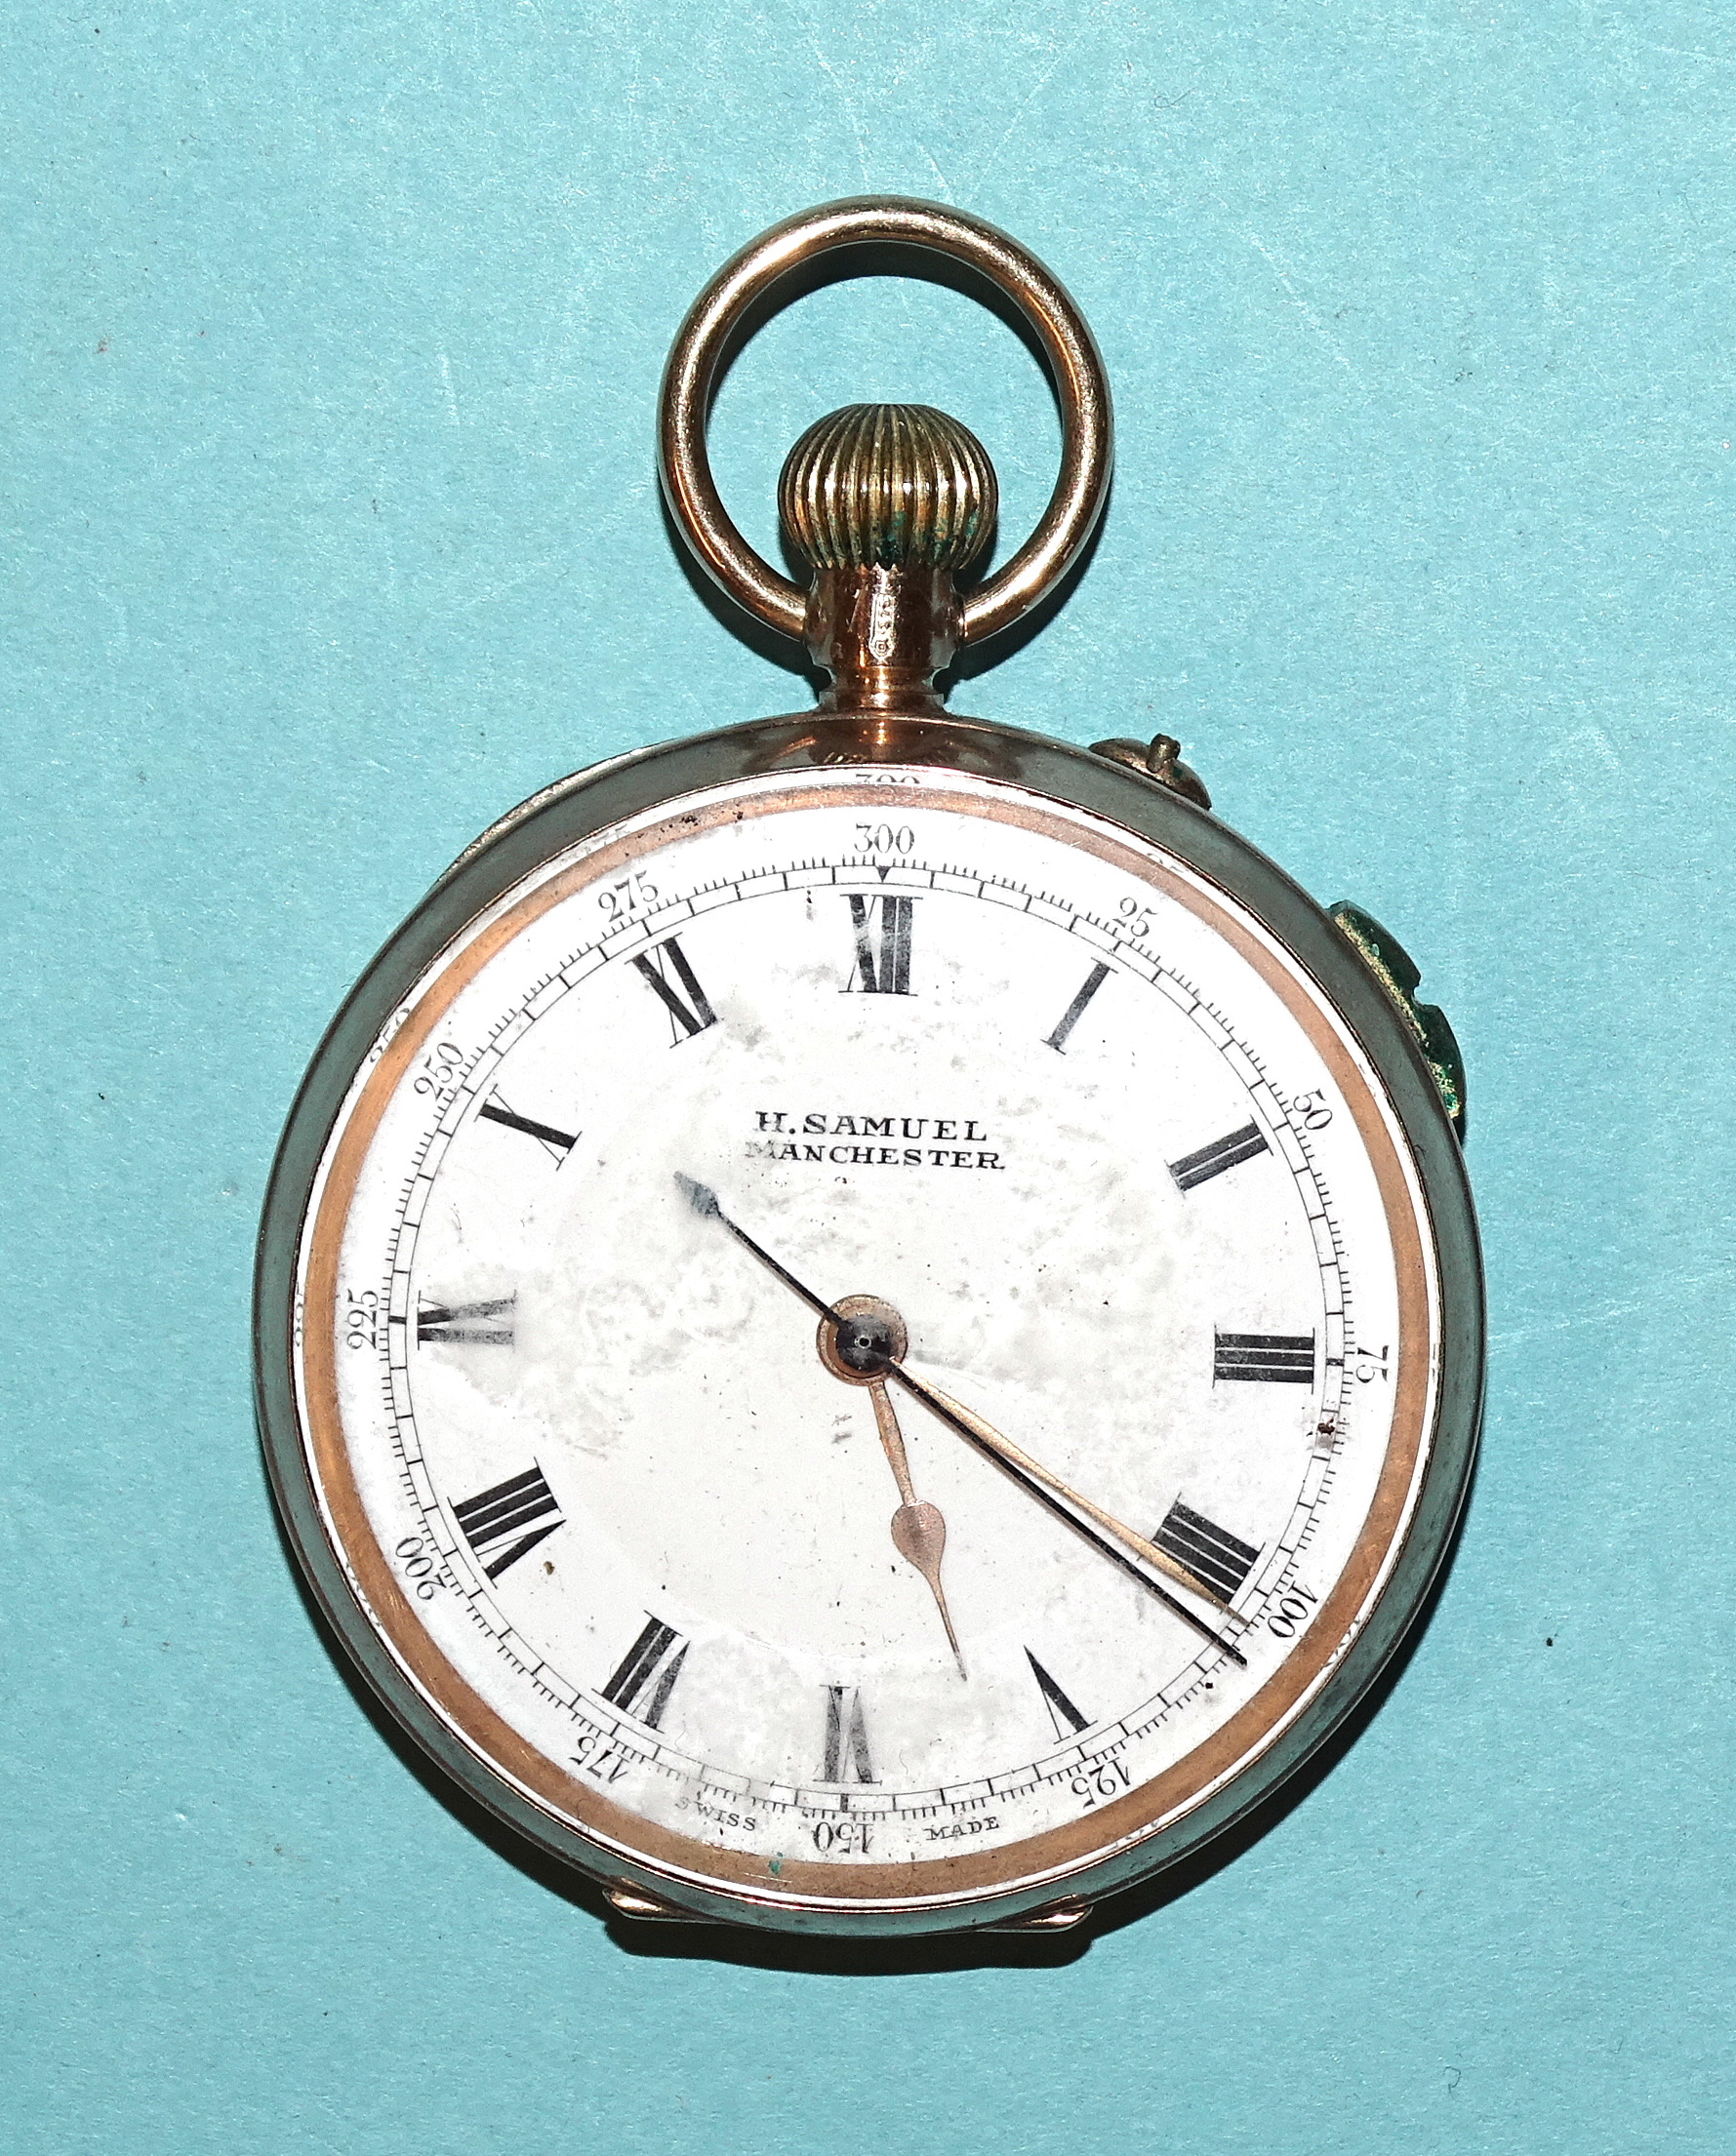 A 9ct gold-cased keyless open-face centre seconds chronograph pocket watch, the movement signed H